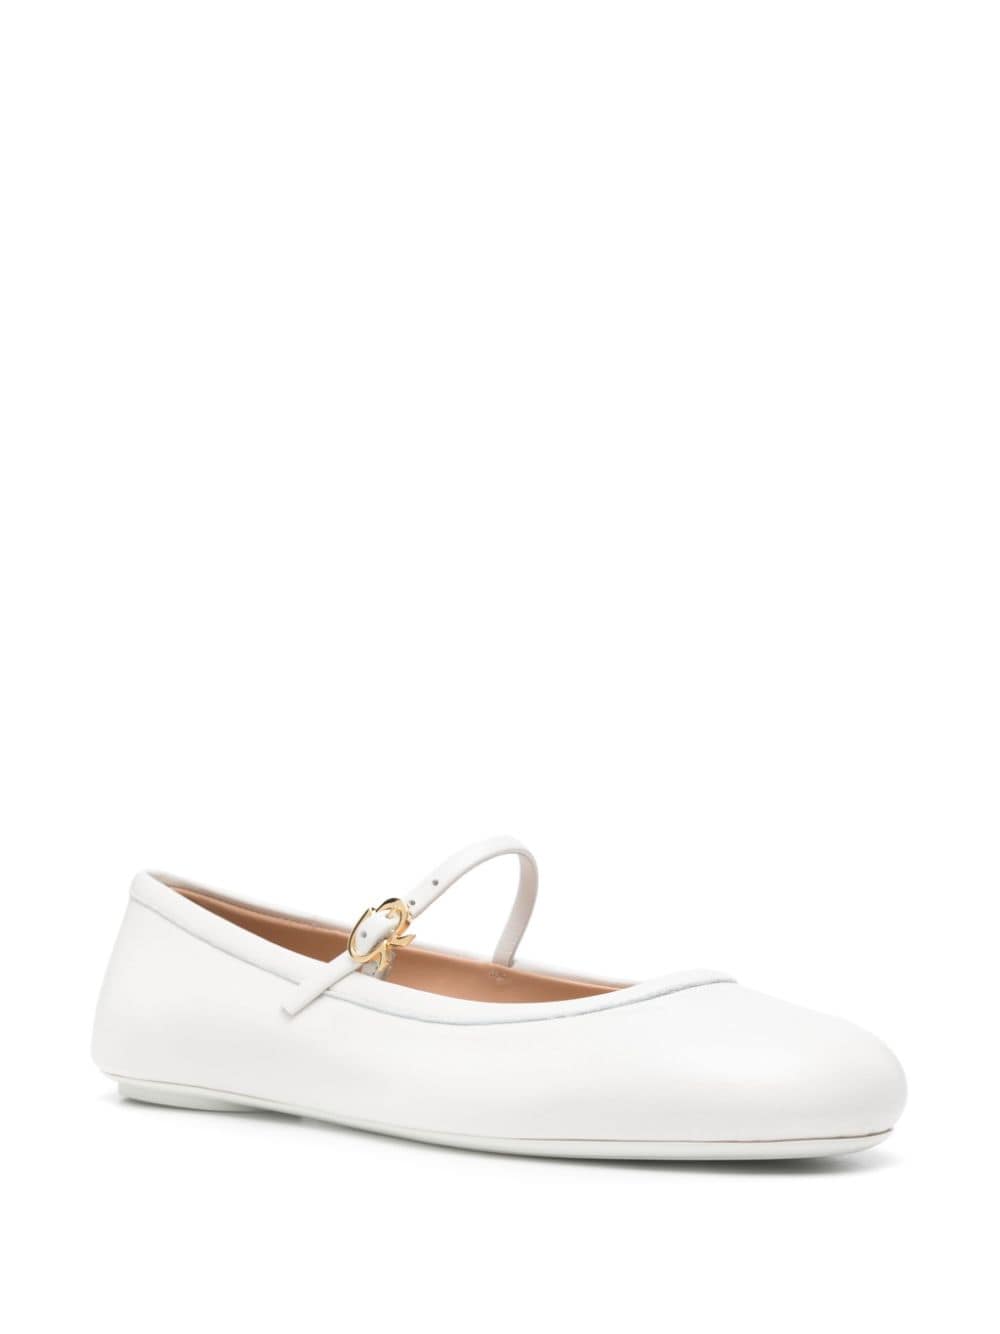 Shop Gianvito Rossi Round-toe Leather Ballerina Shoes In White